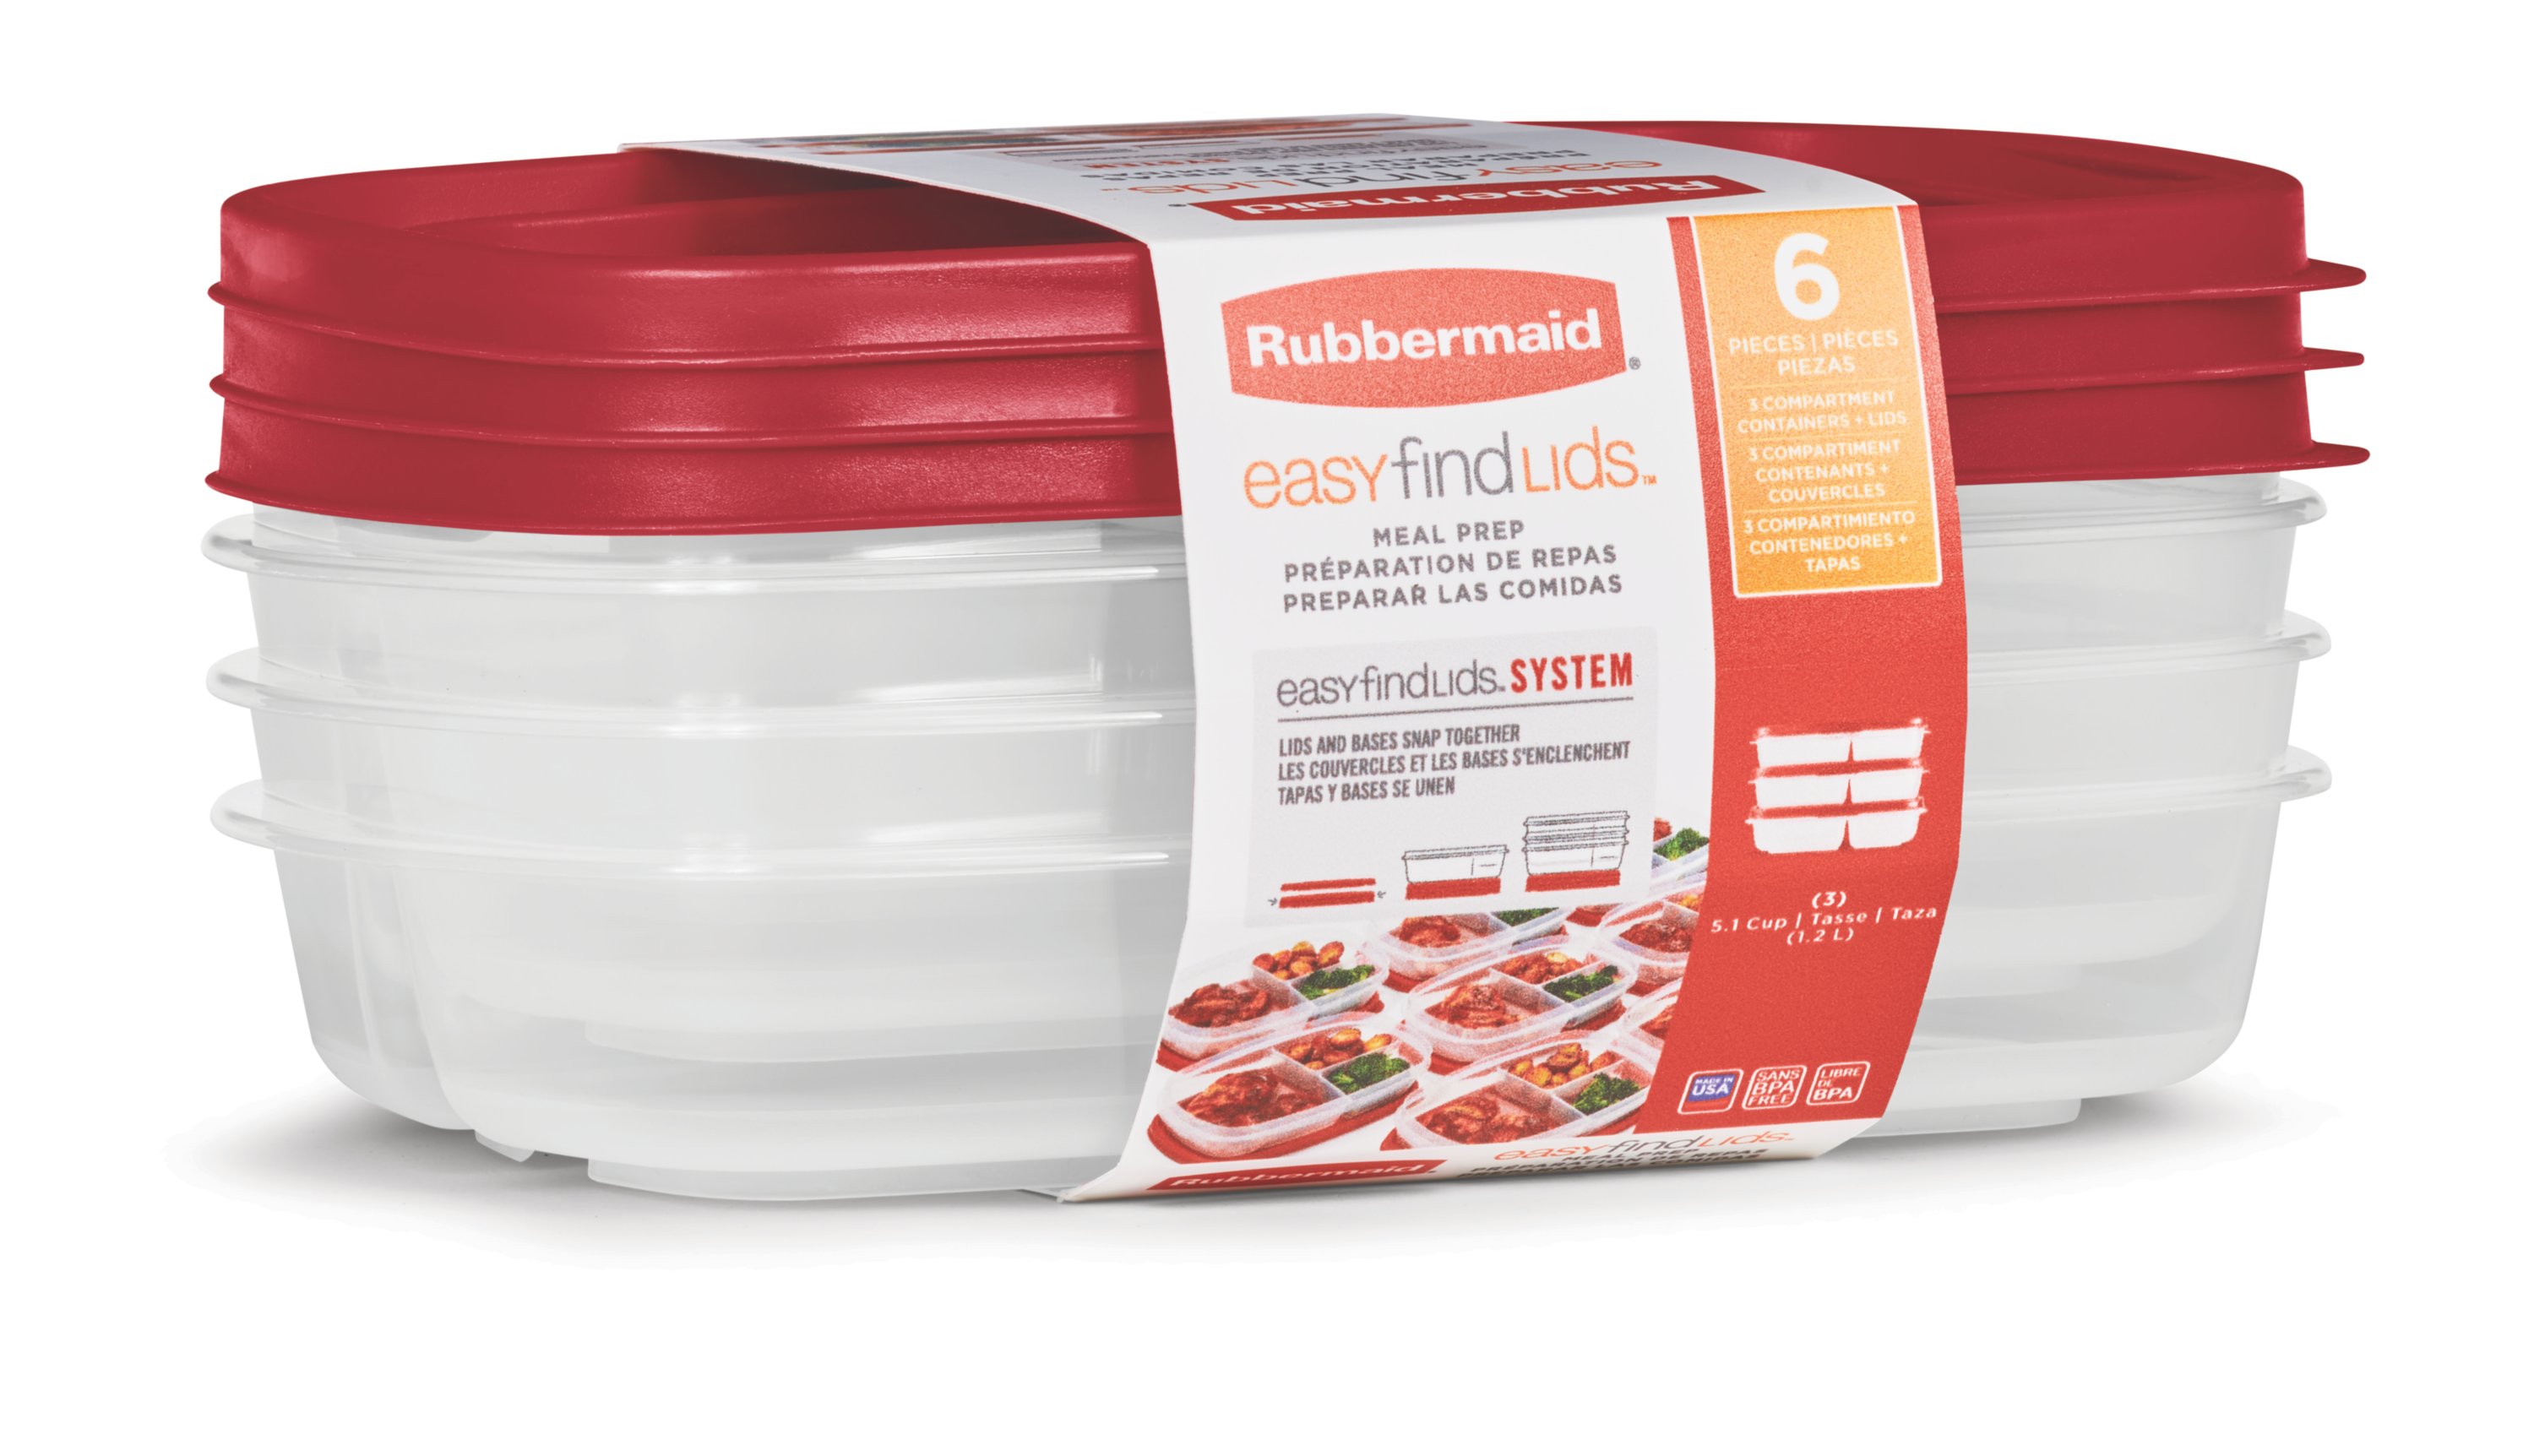 Rubbermaid® Easy-Find Lids Food Storage Container with Dividers